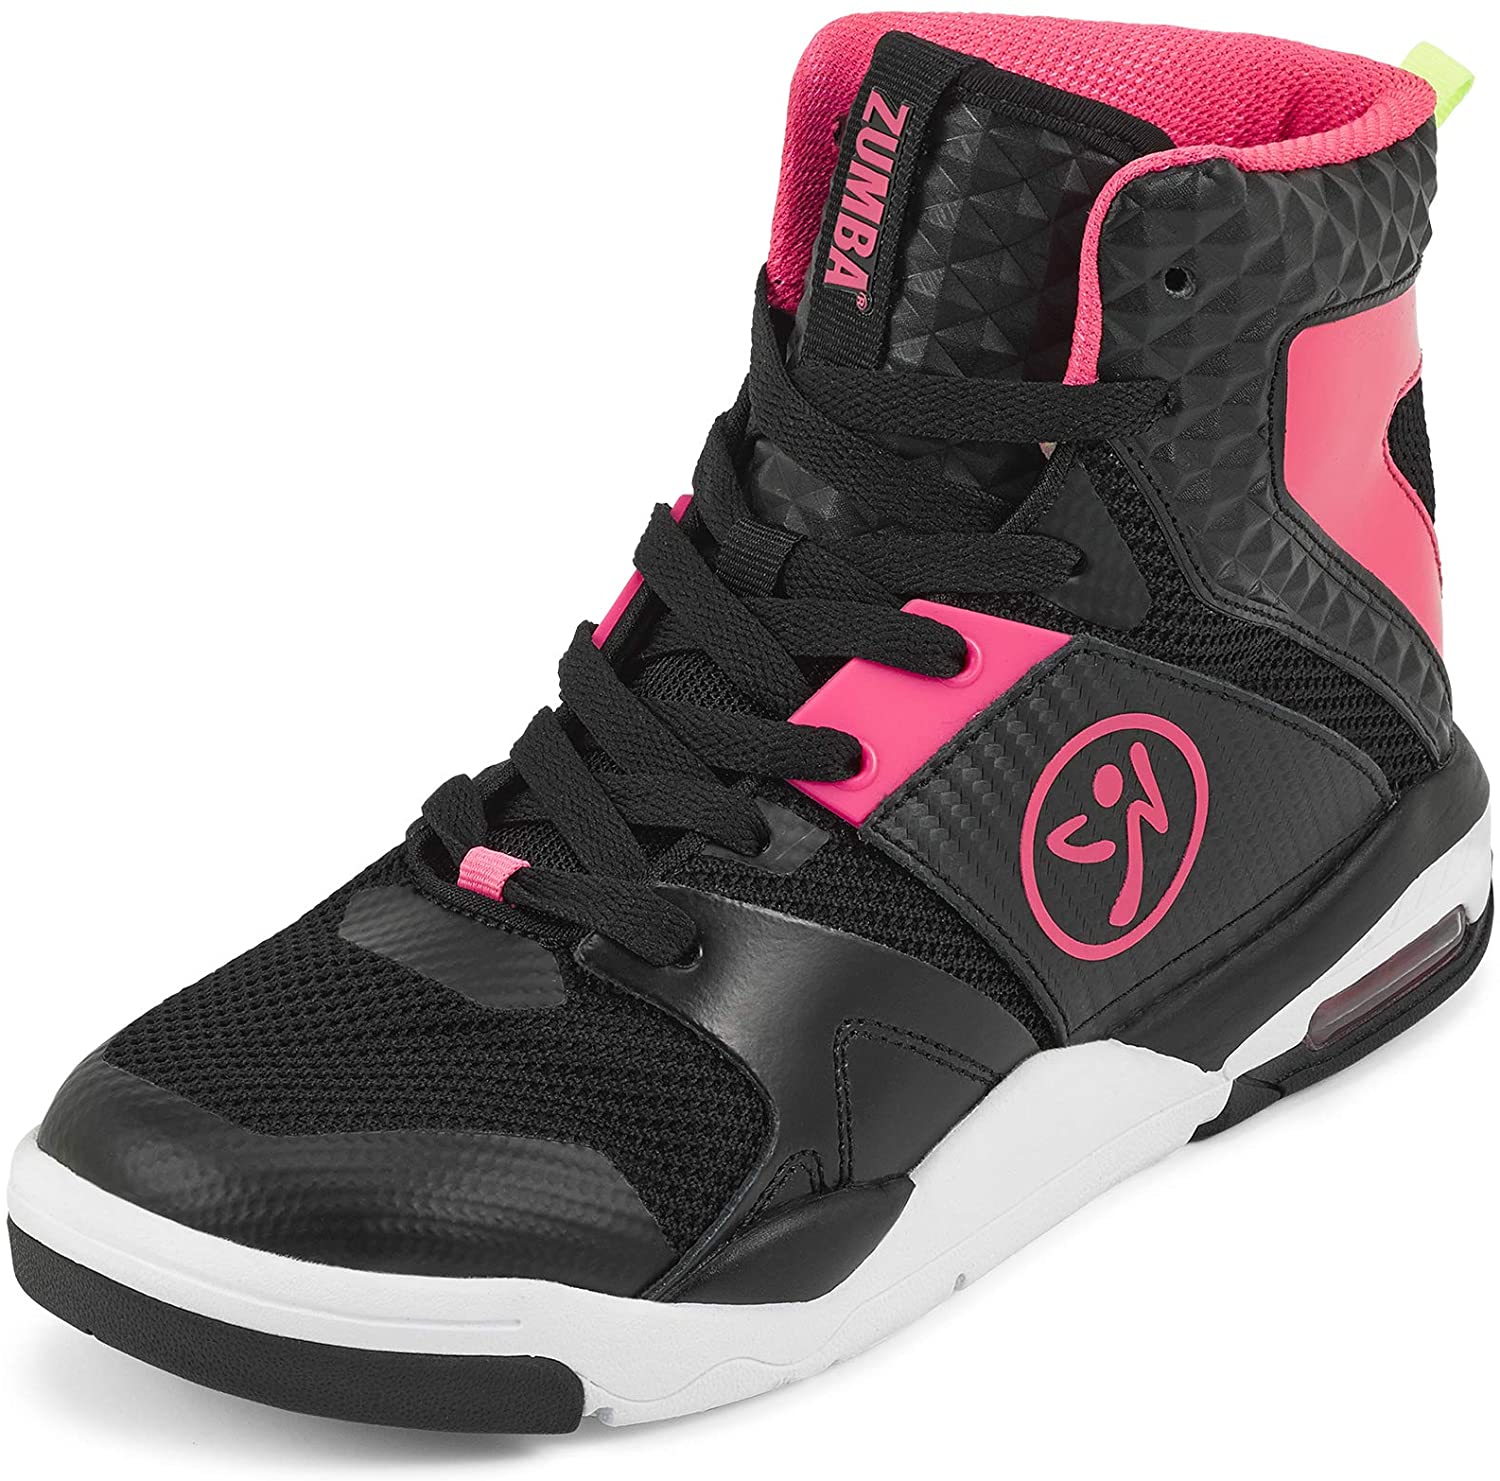 Zumba Air Classic Athletic High Top Shoes Dance Fitness Workout Sneakers for Women 